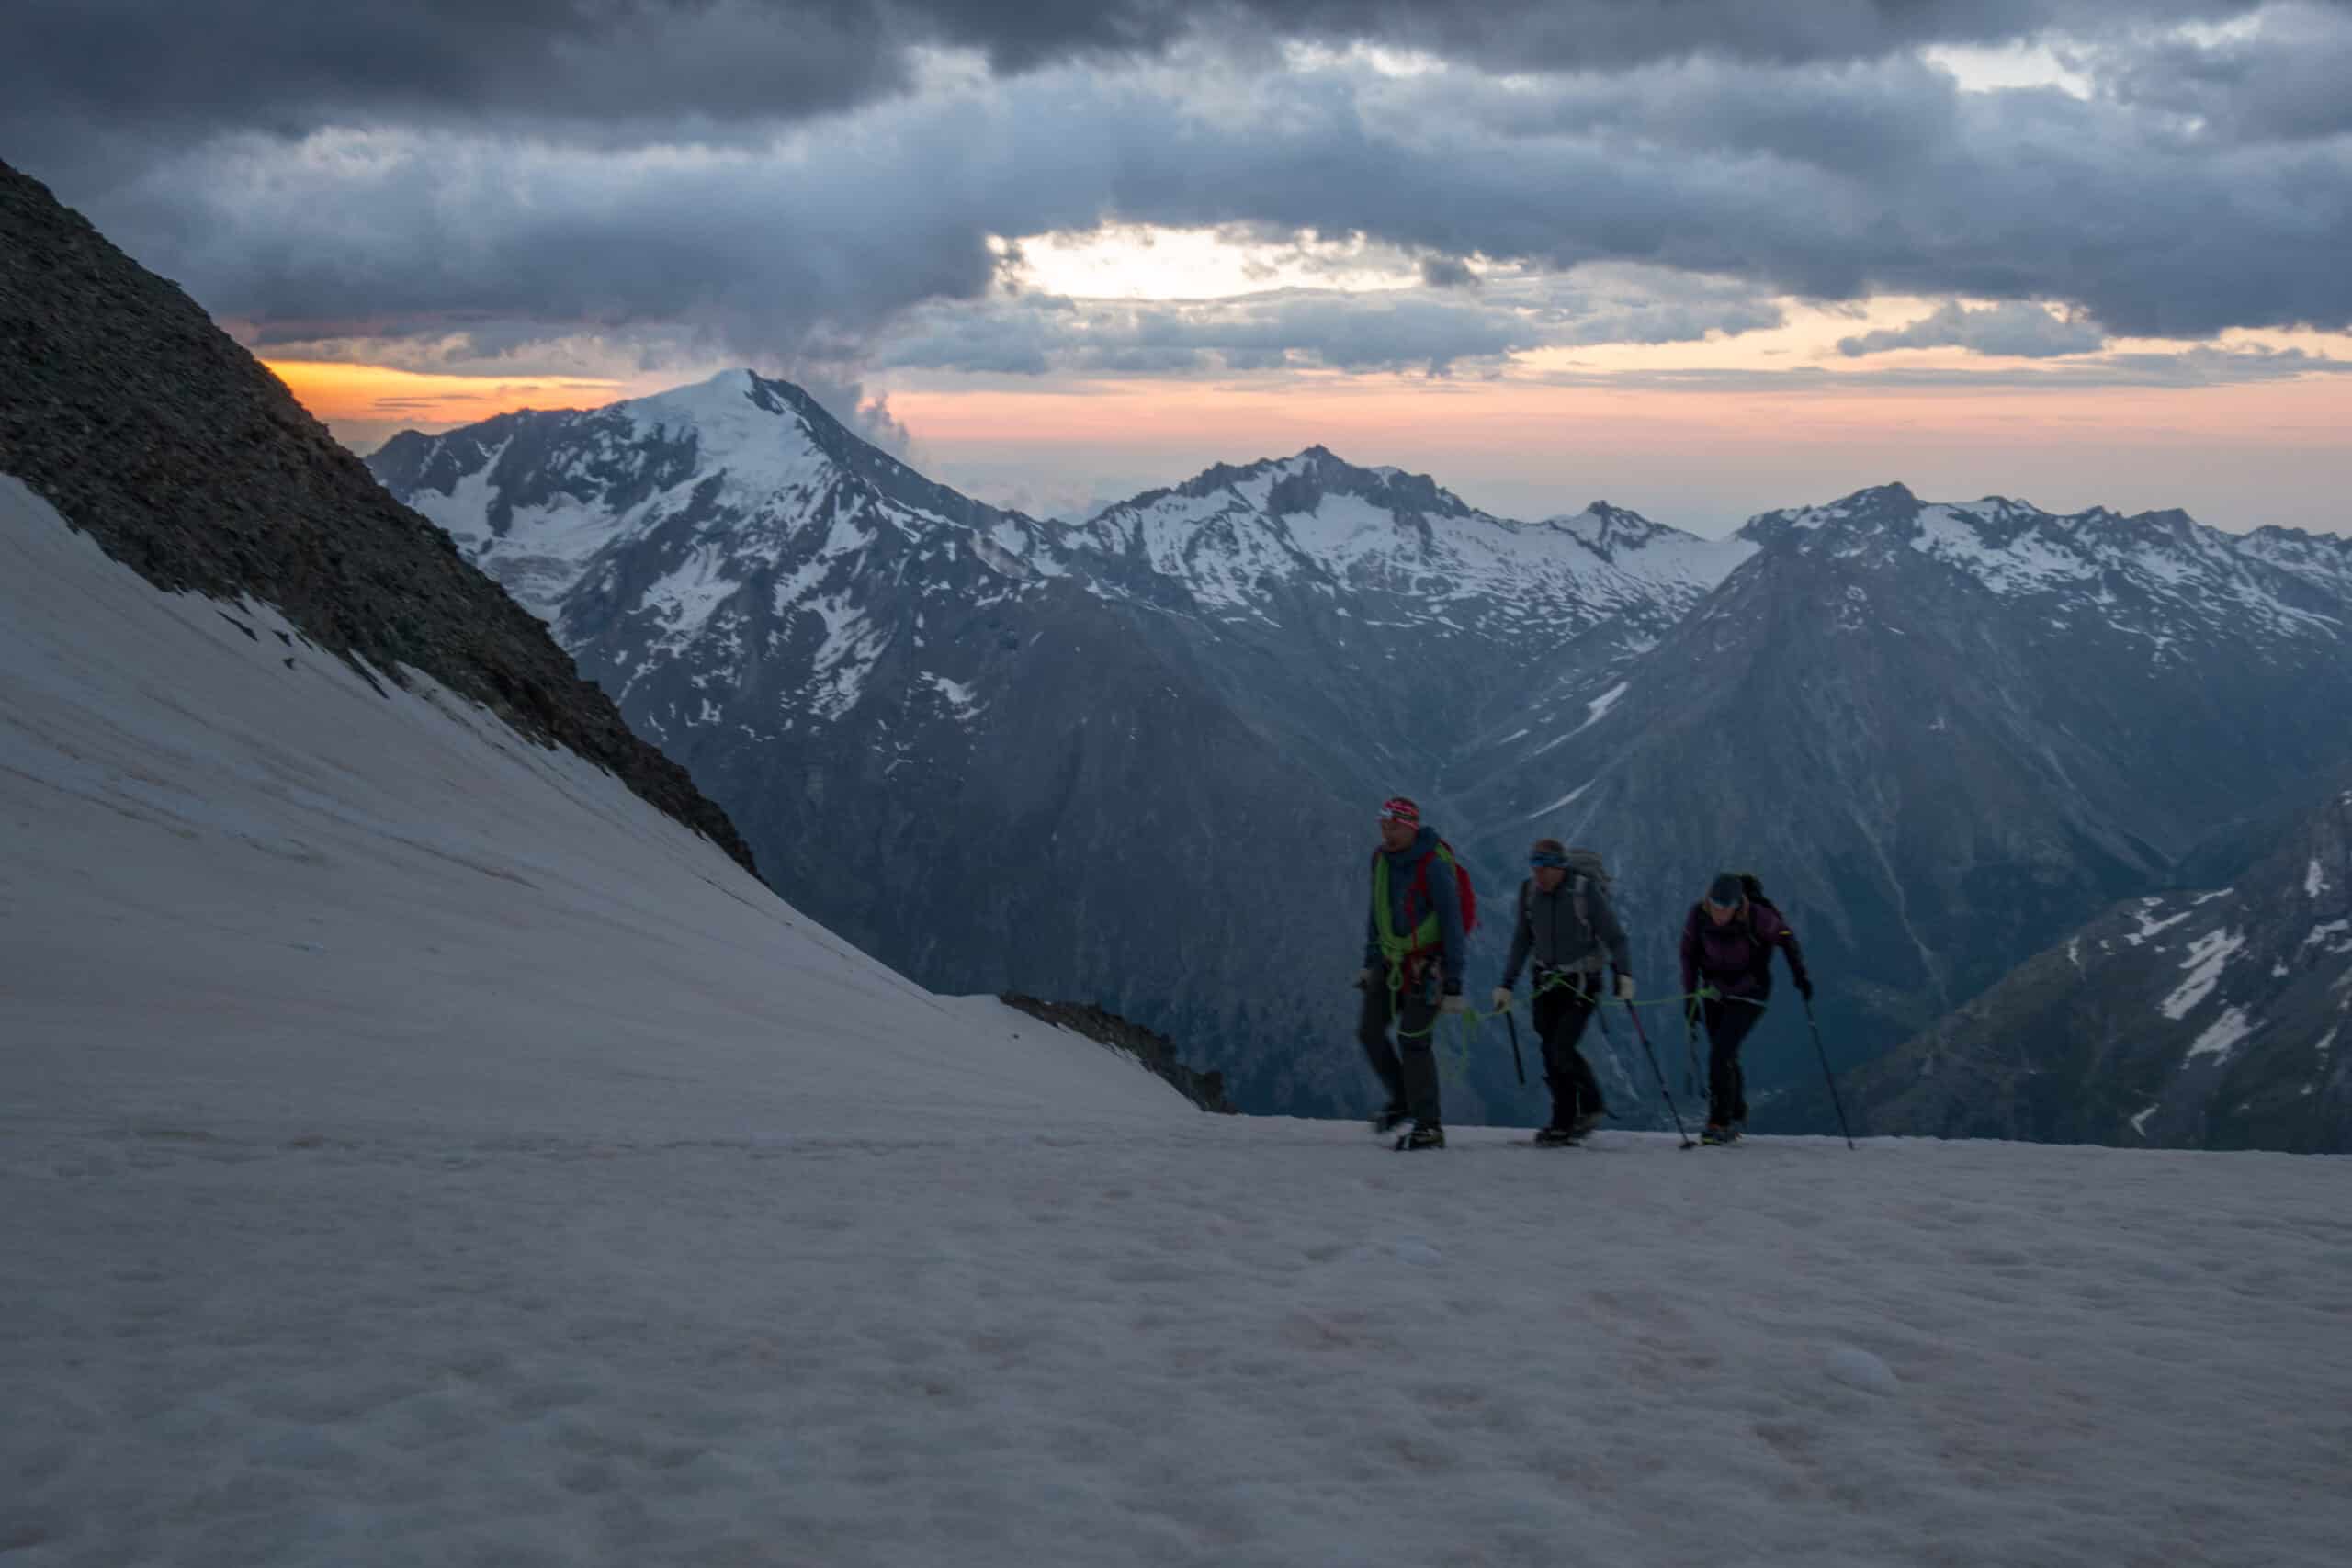 Rope team on a high altitude tour at sunrise